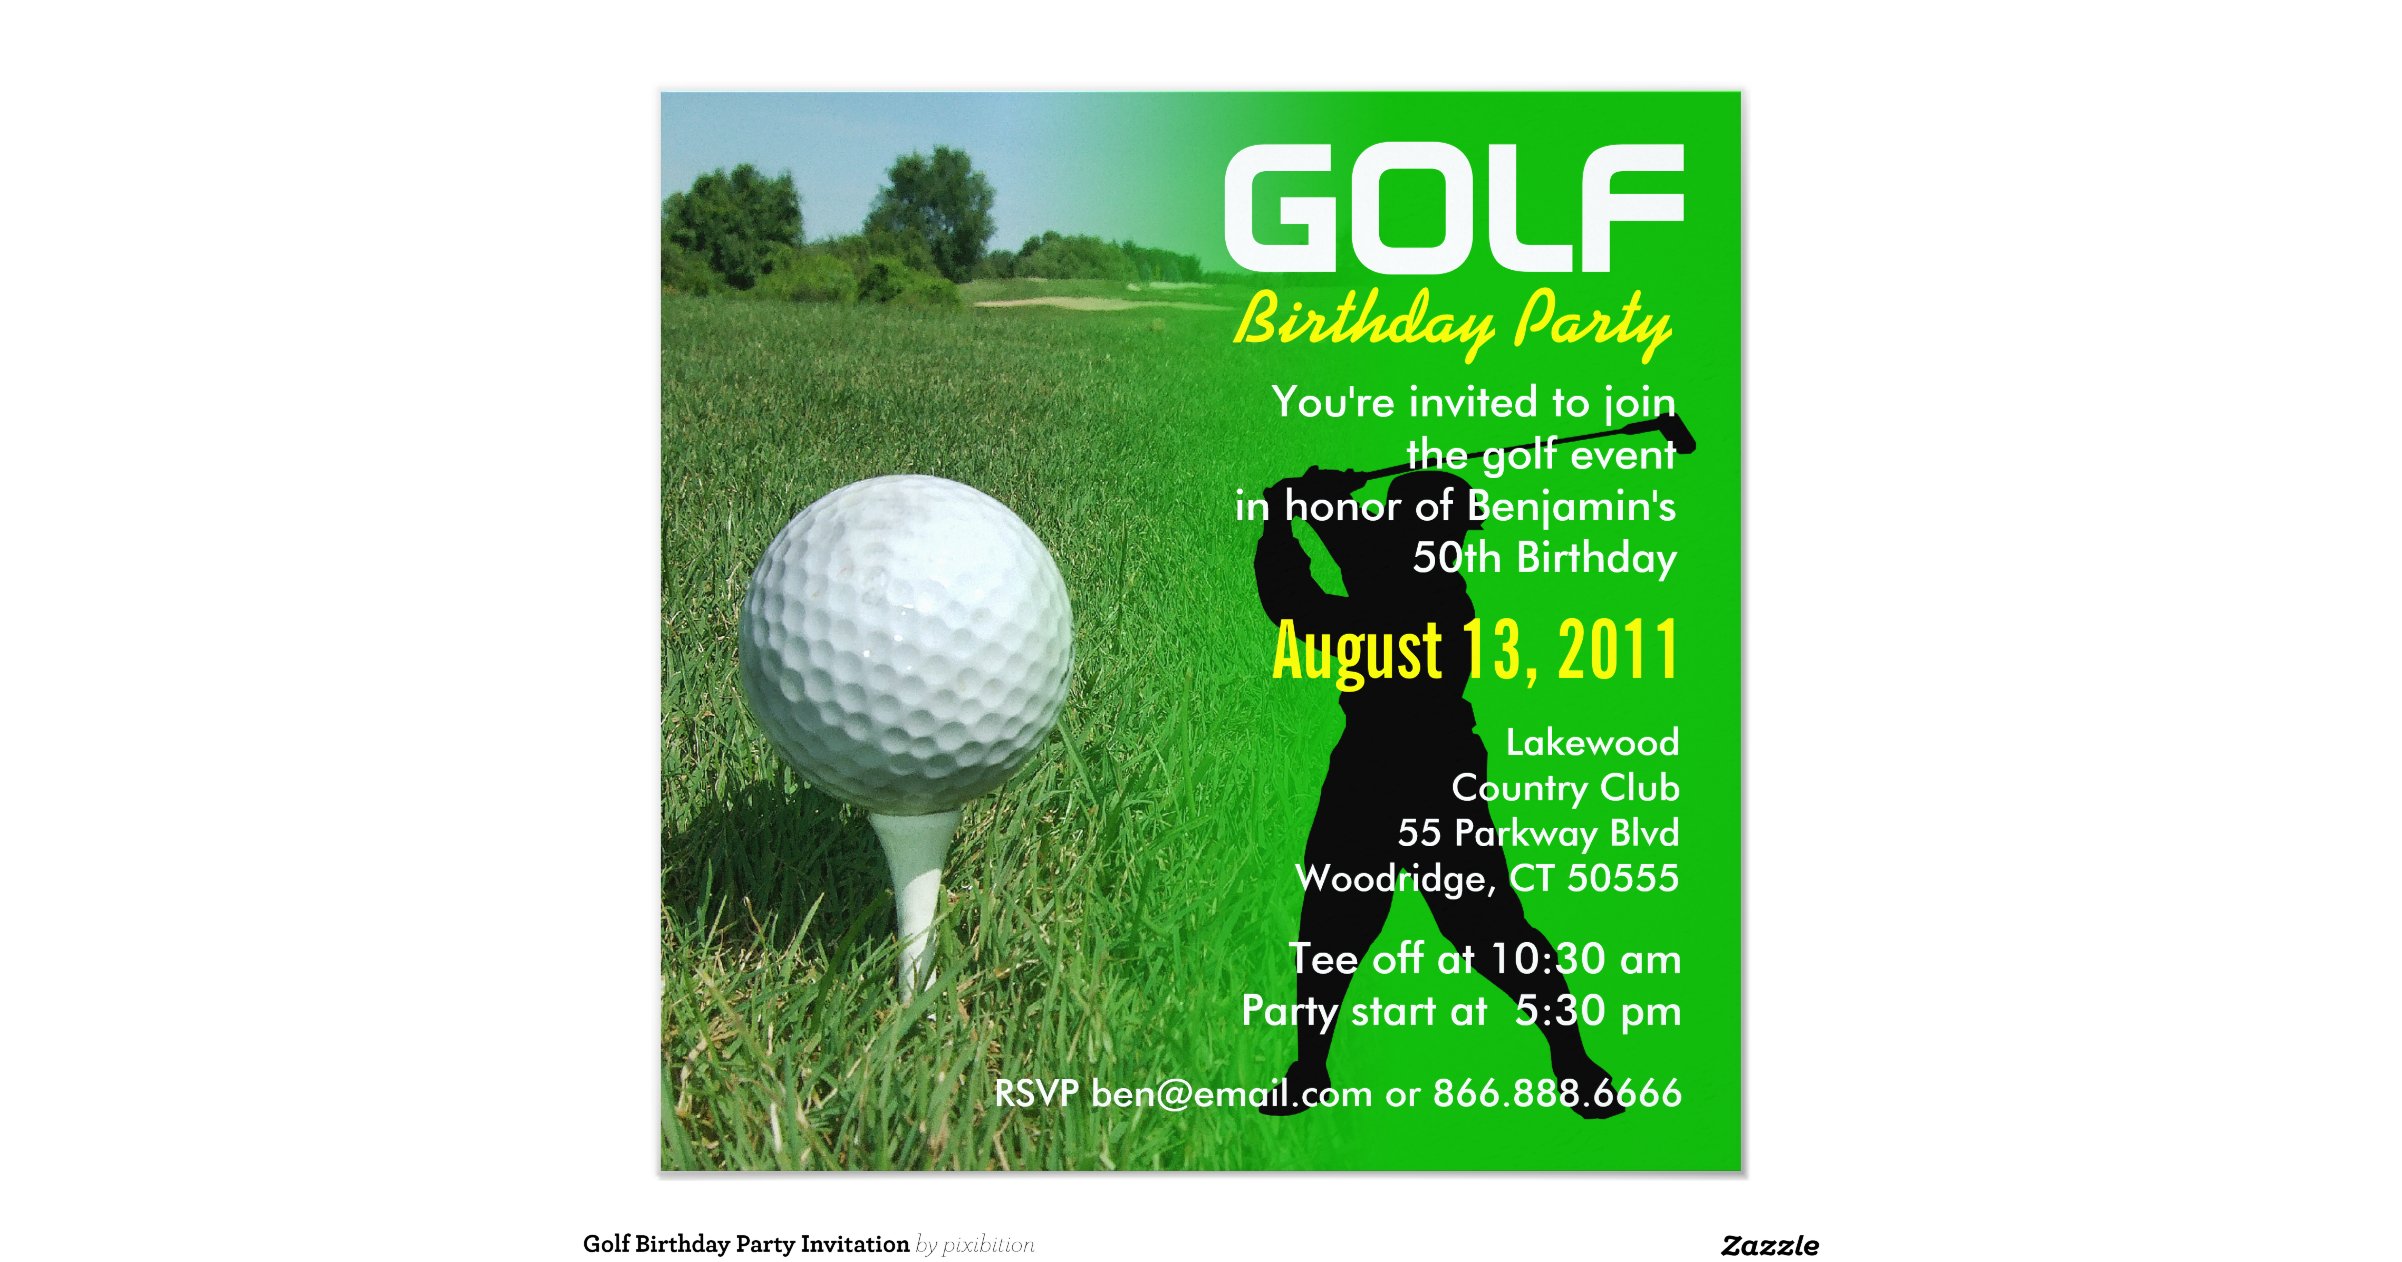 golf-birthday-party-invitation-rb429fad80ed44489a88522d961ddca80-zk9yv